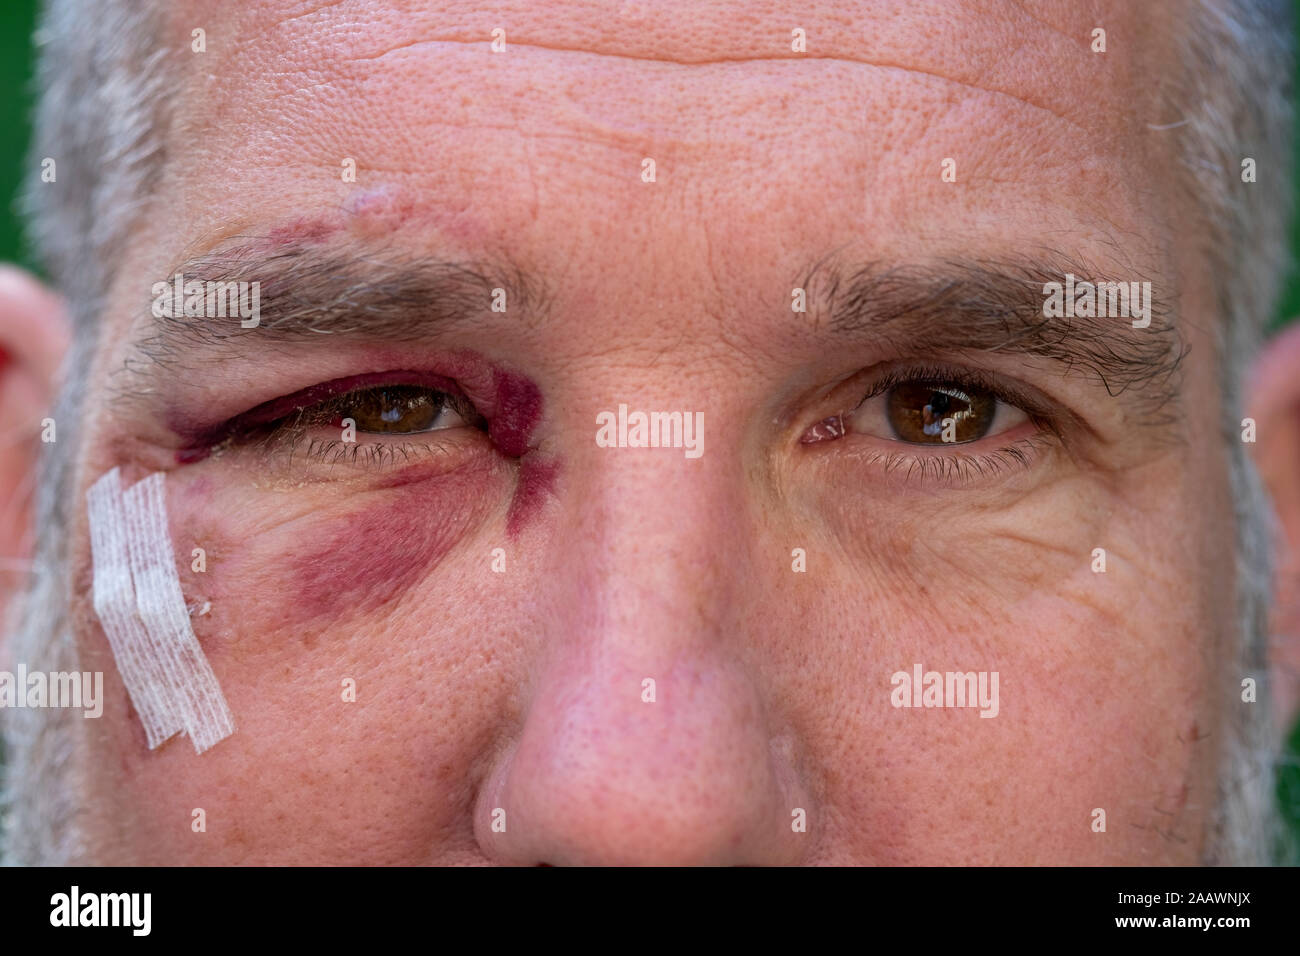 Close-up of man with black eye Stock Photo